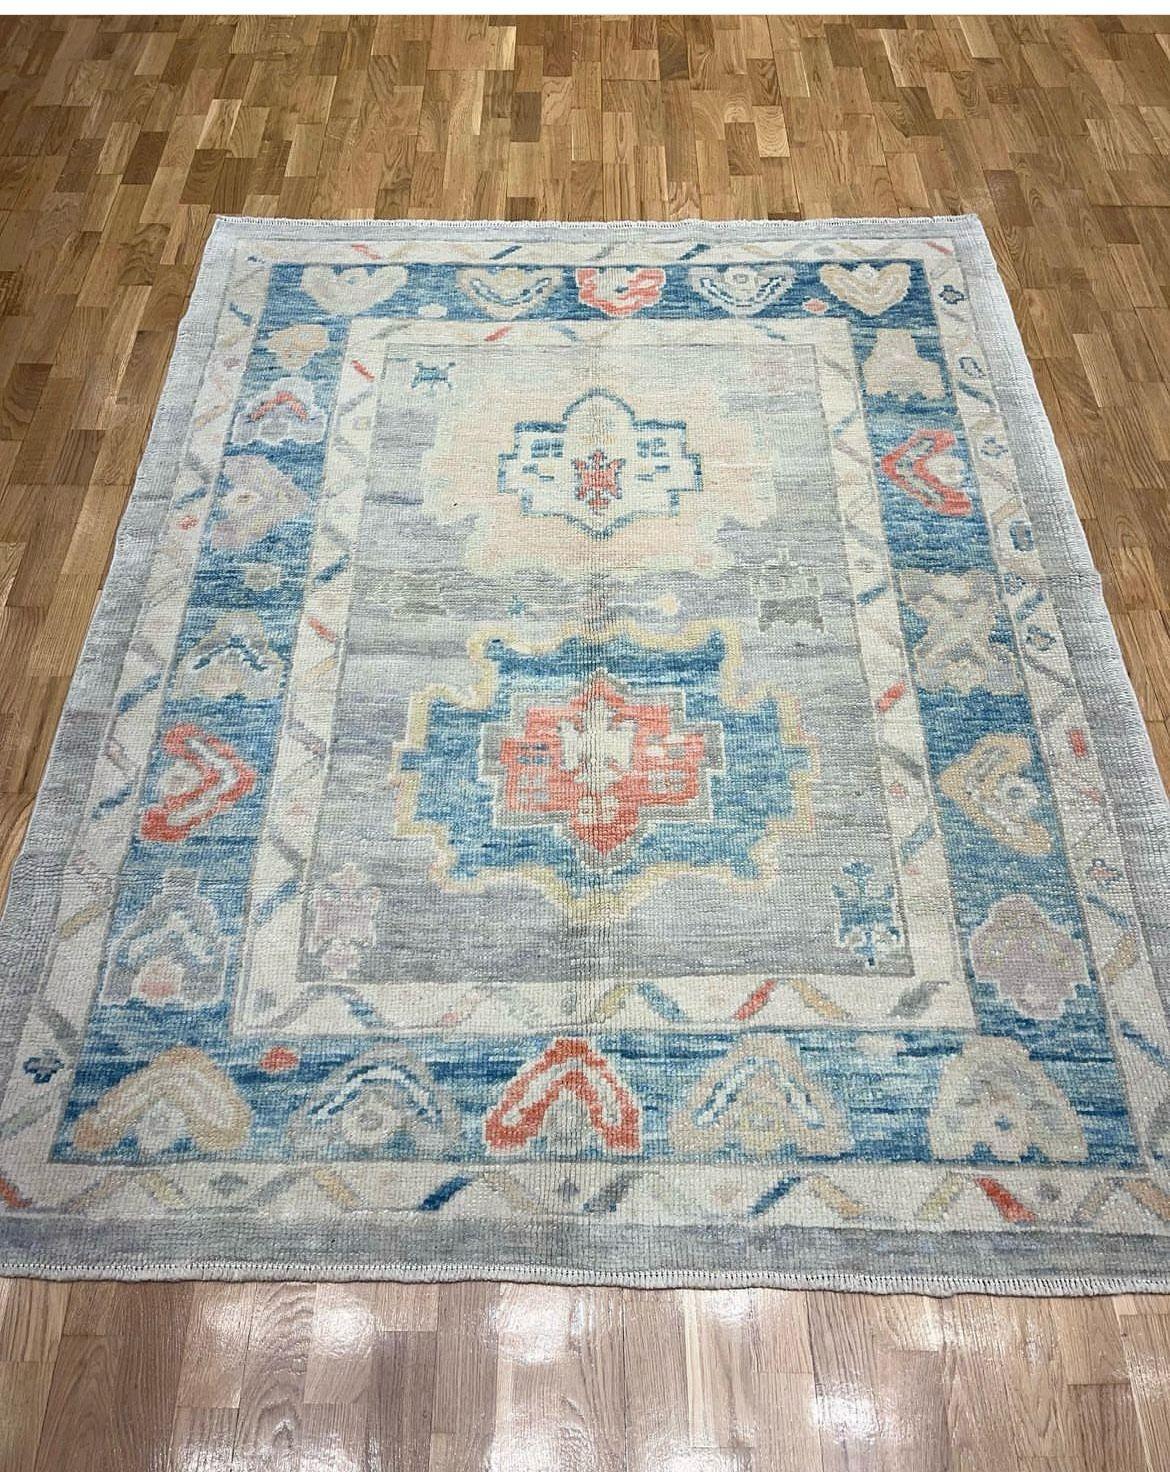 Handwoven Wool Turkish Oushak Rug 5’ x 6’4” #CB04 In Excellent Condition For Sale In Houston, TX